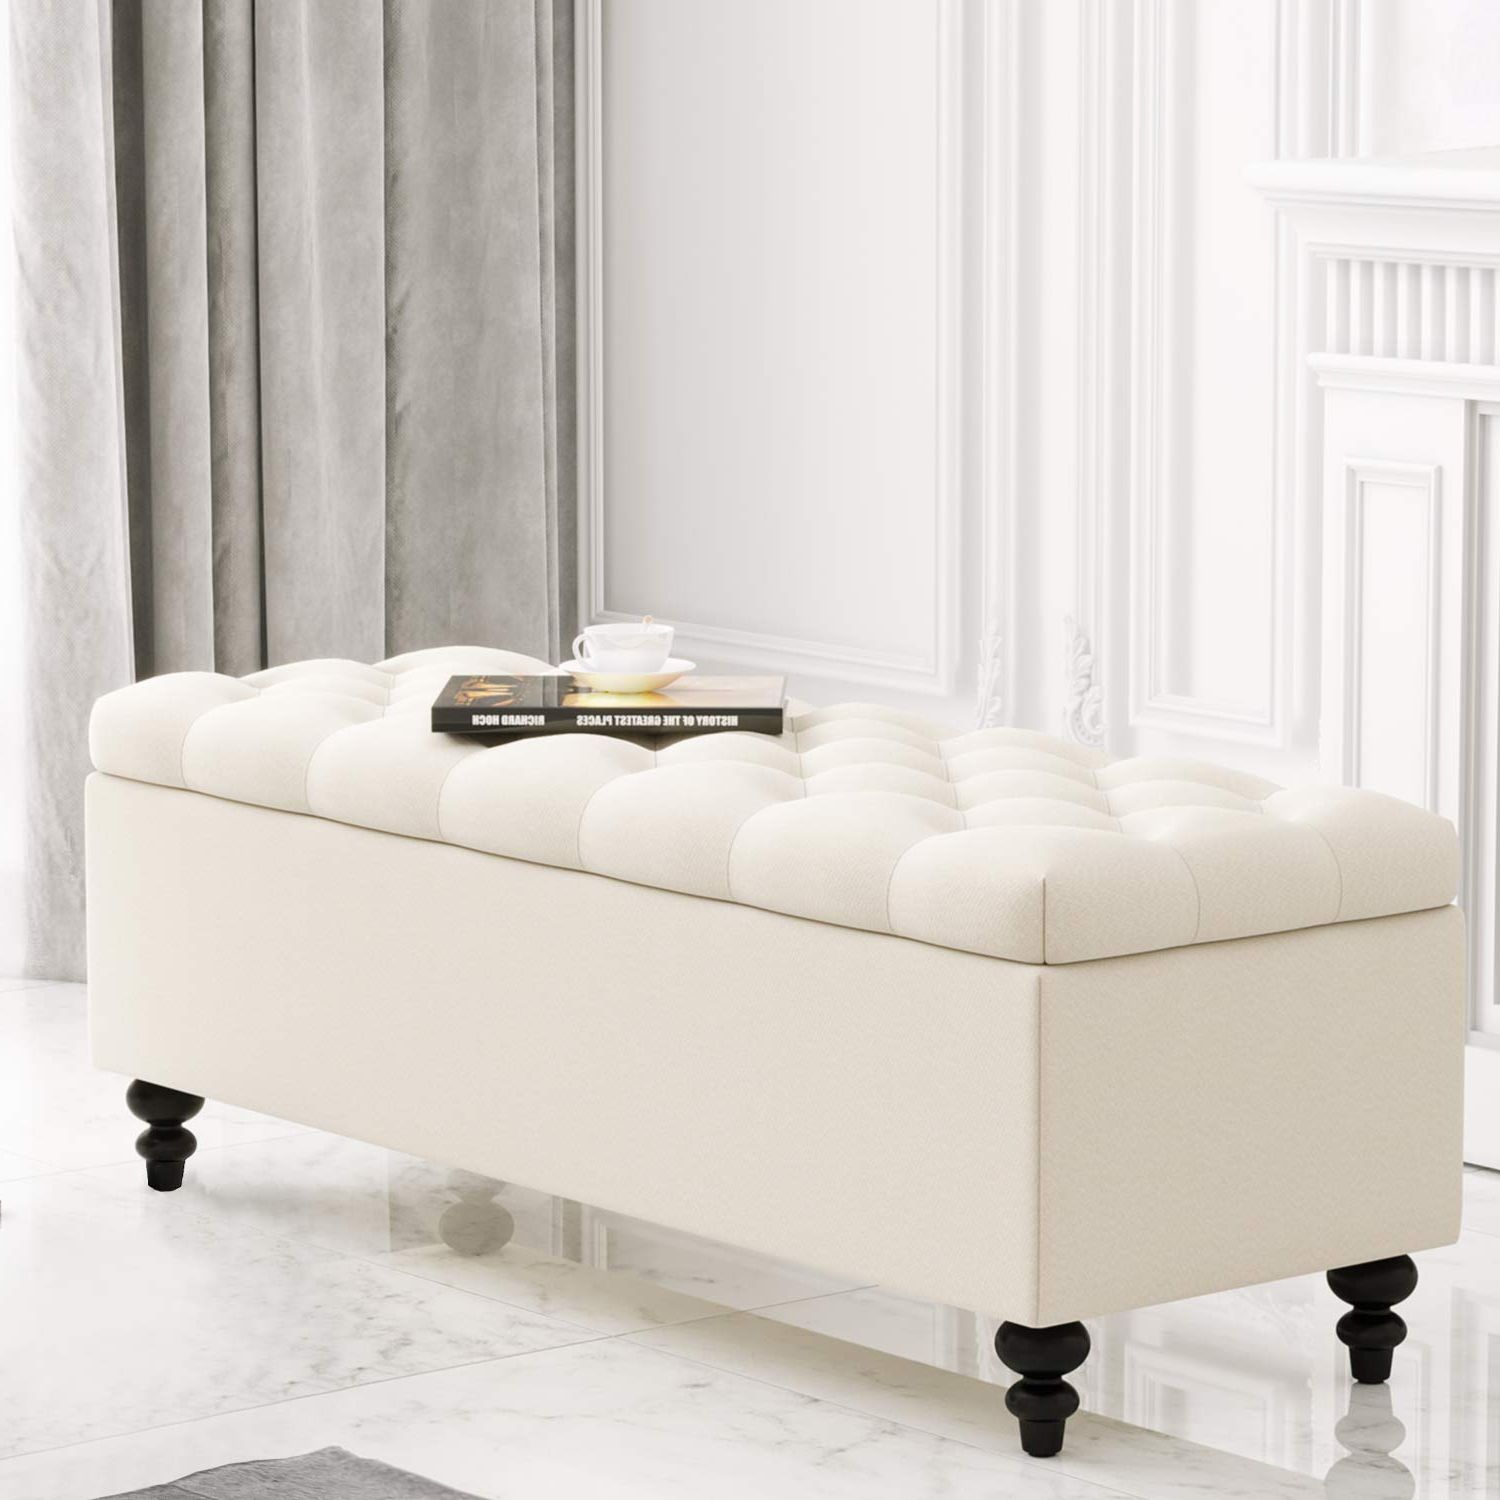 2017 Ivory And Blue Ottomans For Amazon: Huimo Ottoman With Storage, 51 Inch Storage Ottoman Bench With  Button Tufted, Bedroom Bench Safety Hinge Ottoman In Upholstered Fabrics,  Large Storage Bench For Bedroom, Living Room (ivory) : Home & Kitchen (View 7 of 10)